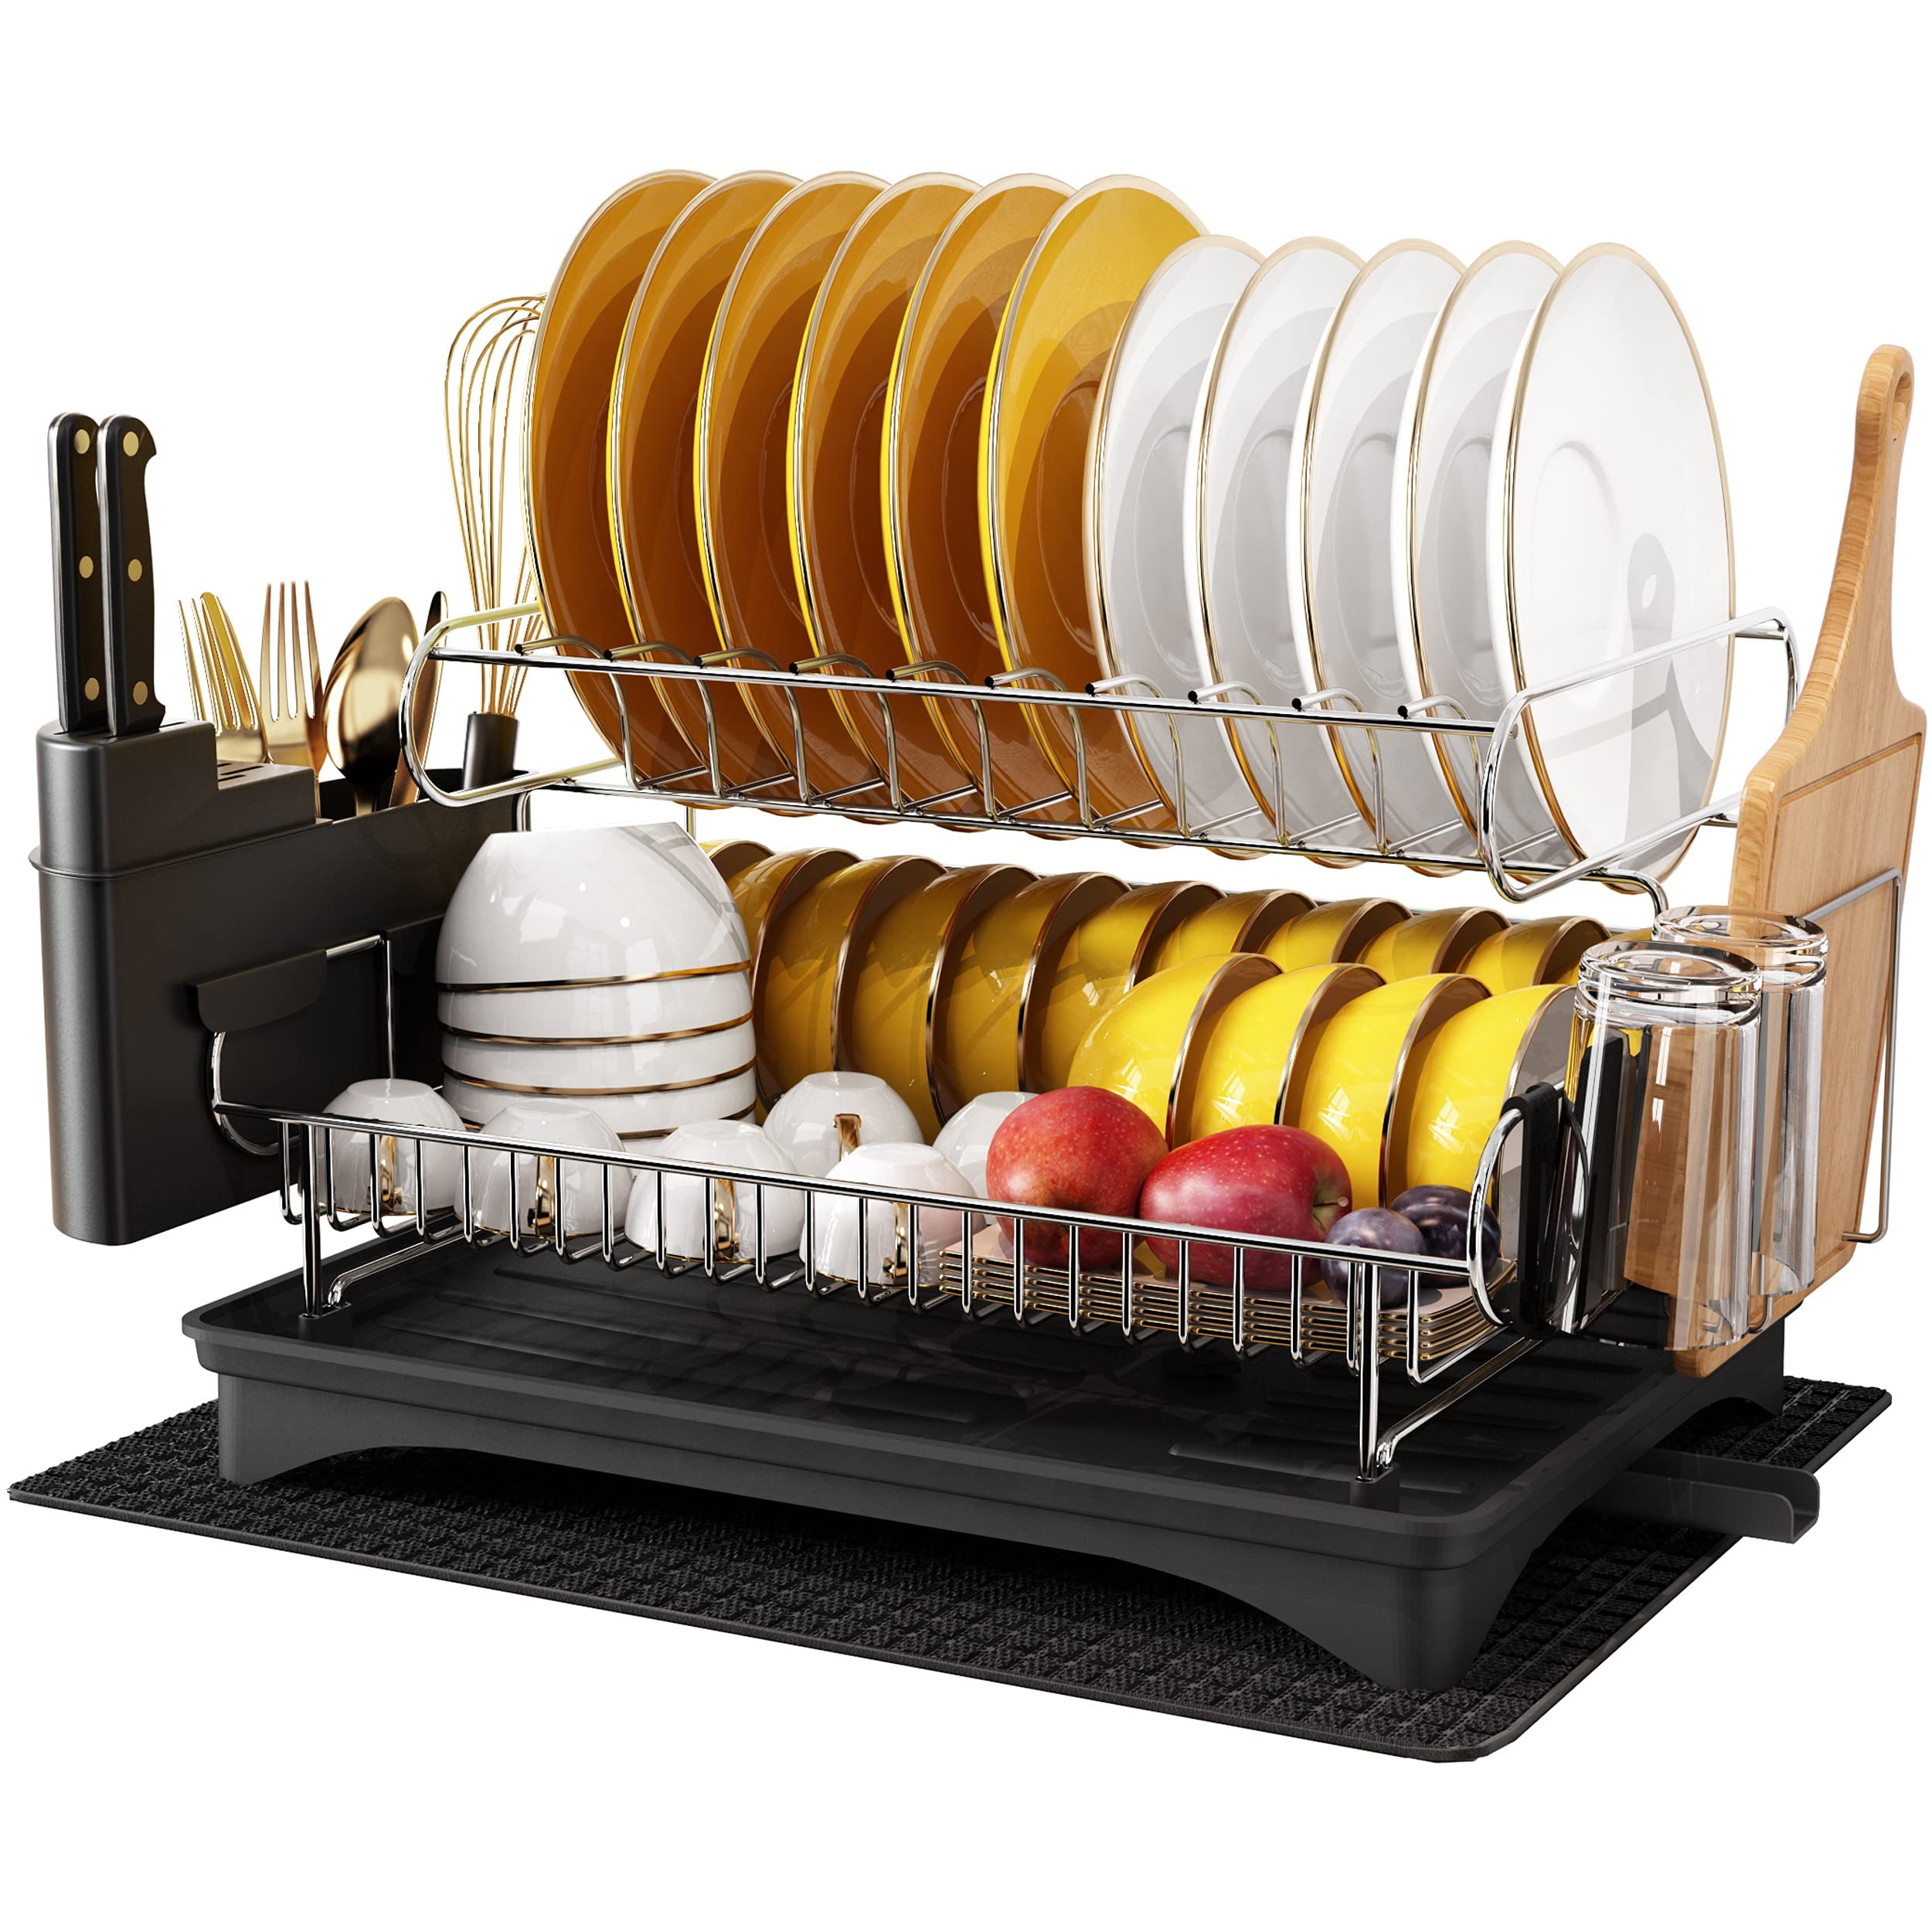  ORZ Dish Drying Rack, Dish Racks for Kitchen Counter